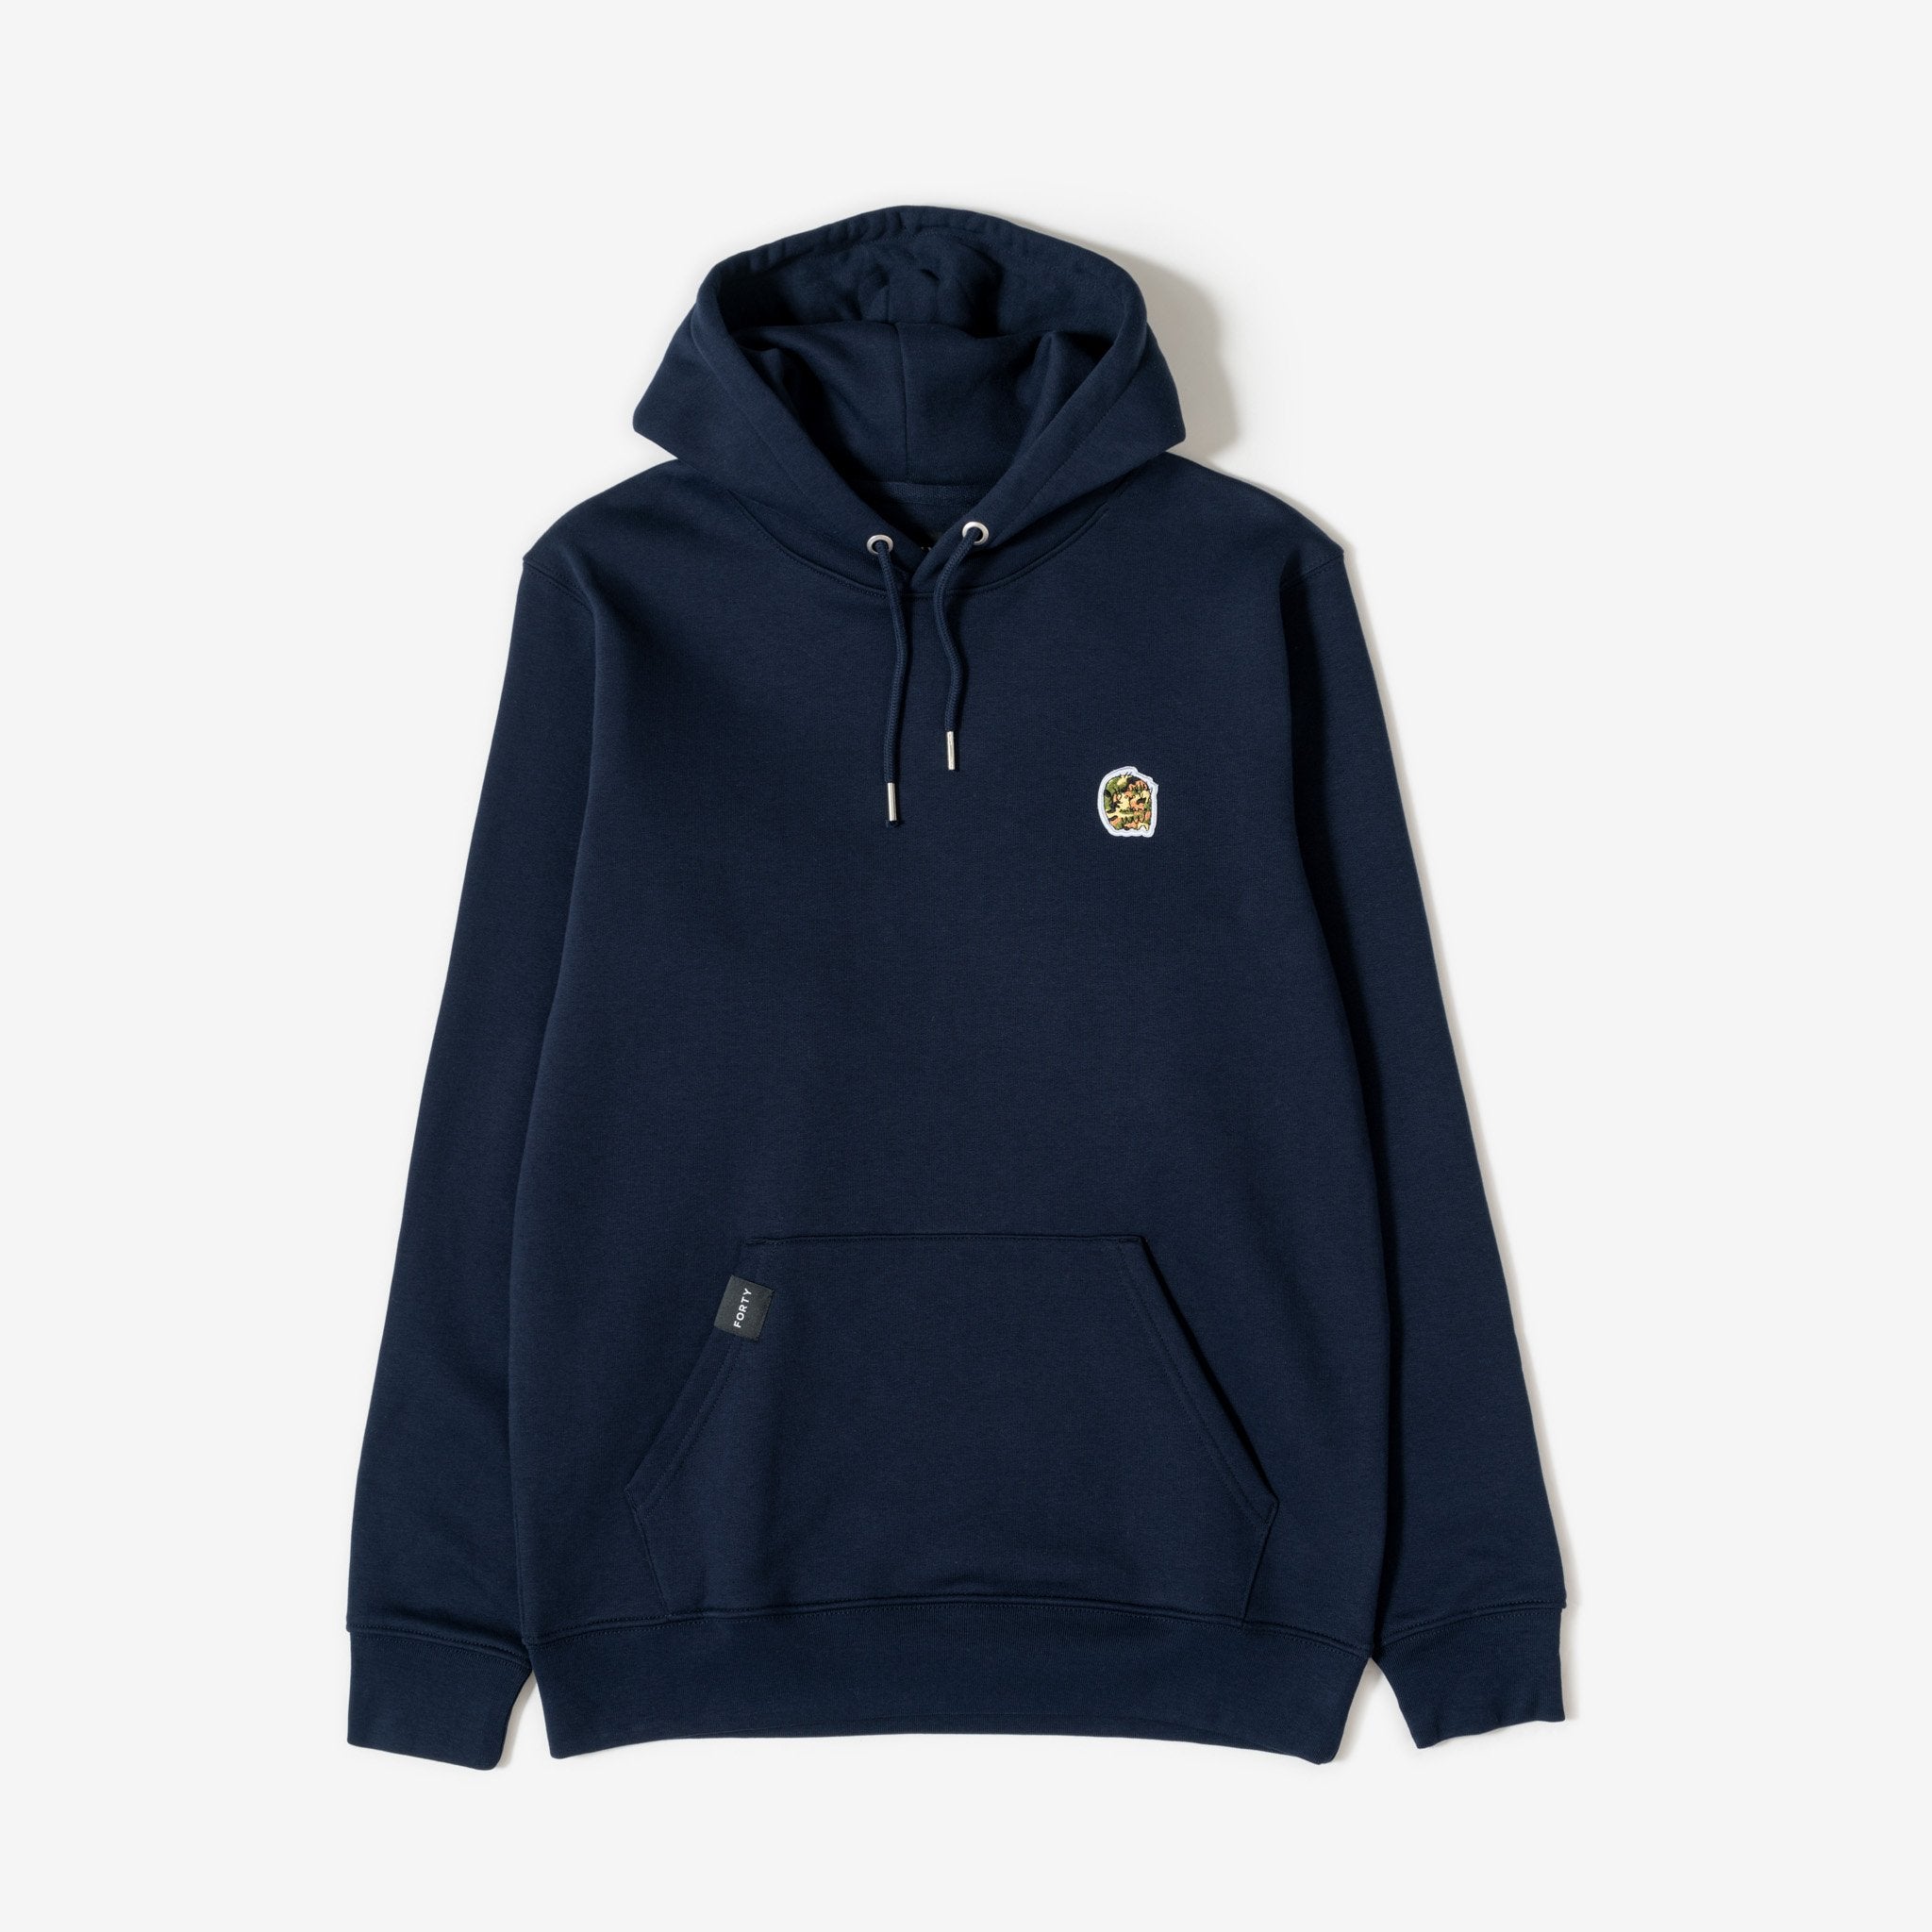 FORTY Tom Hoodie (Navy) xccscss.